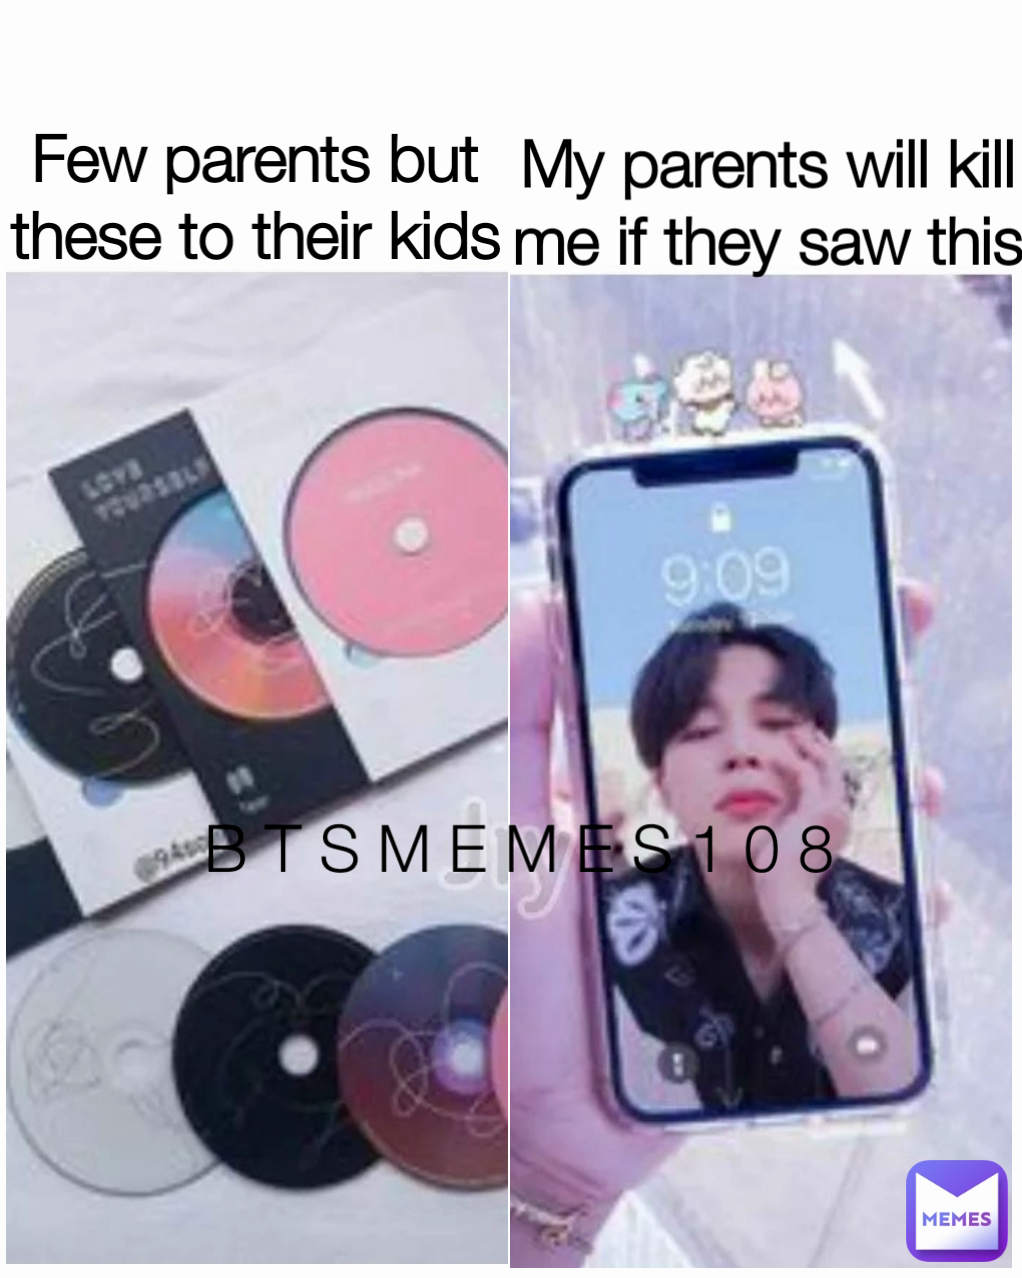 BTSMEMES108  Few parents but these to their kids My parents will kill me if they saw this